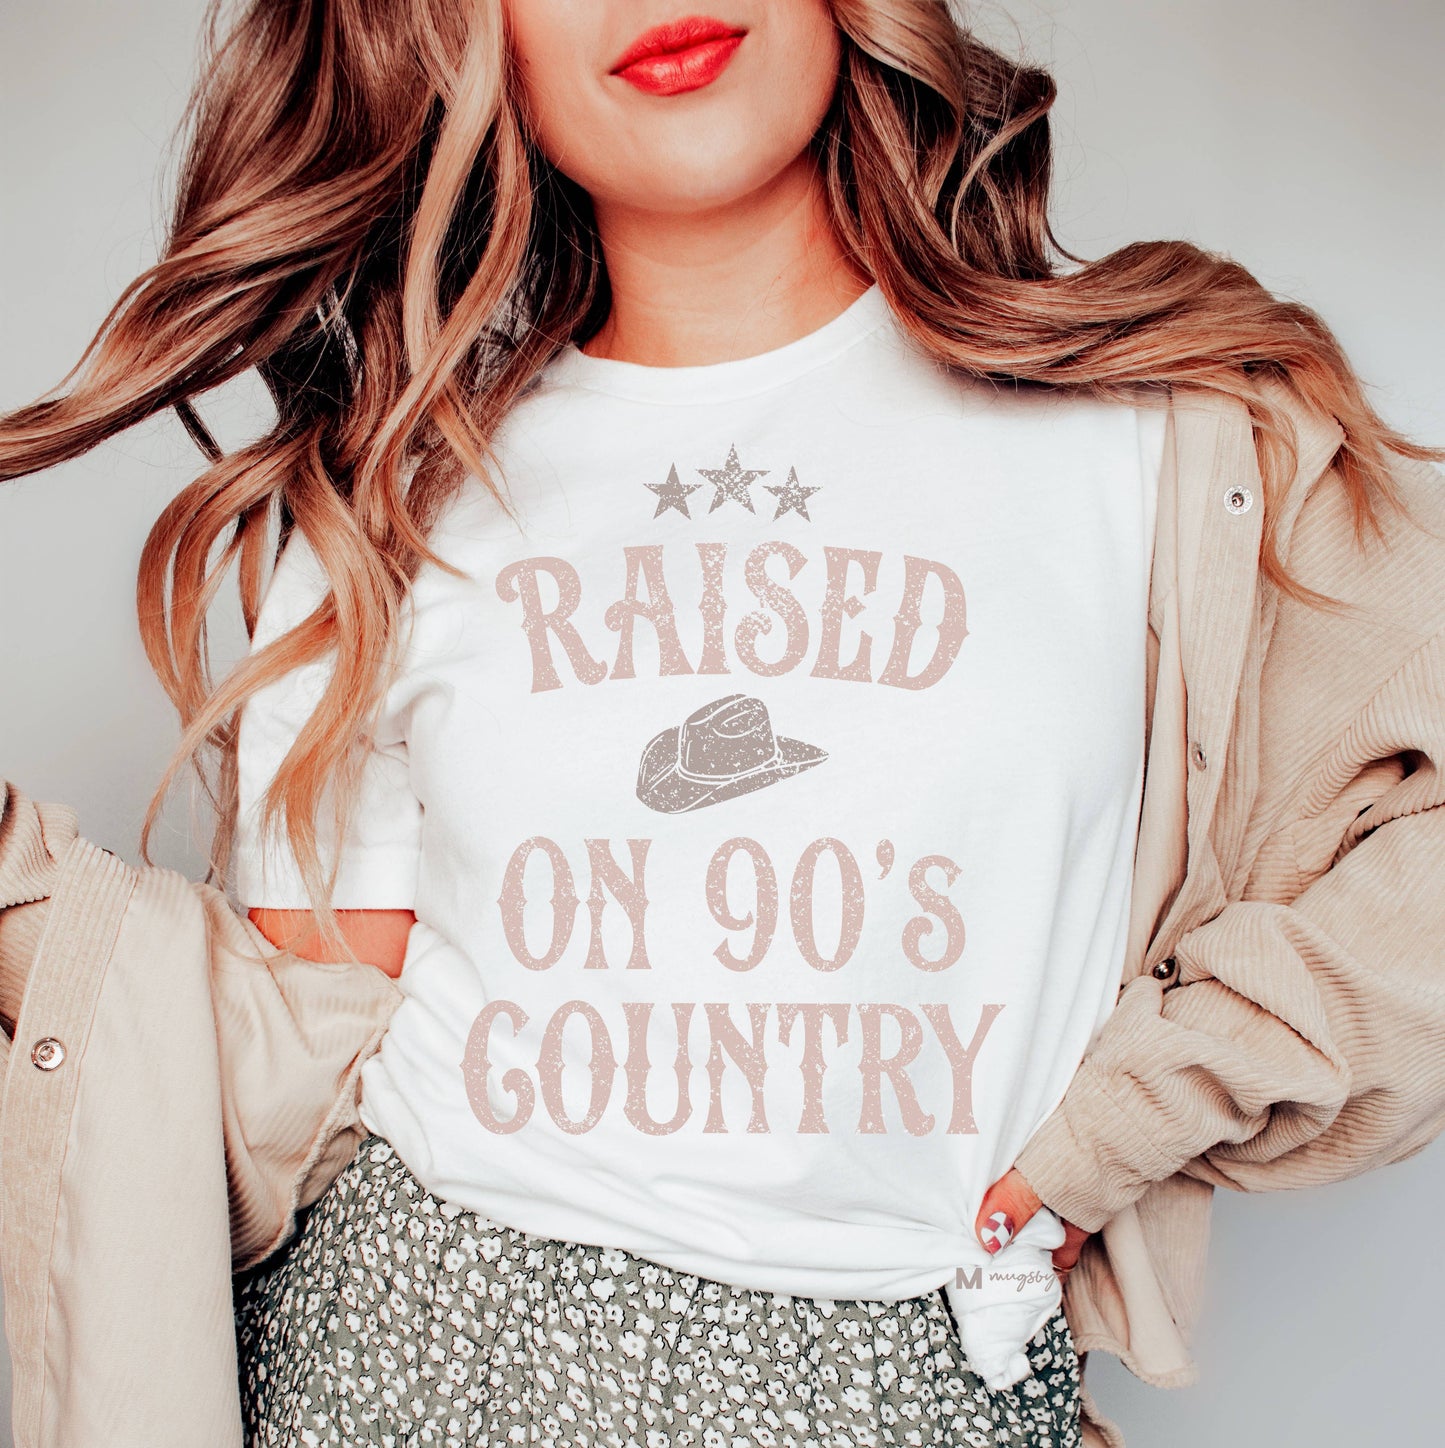 Raised on 90s Country Shirt